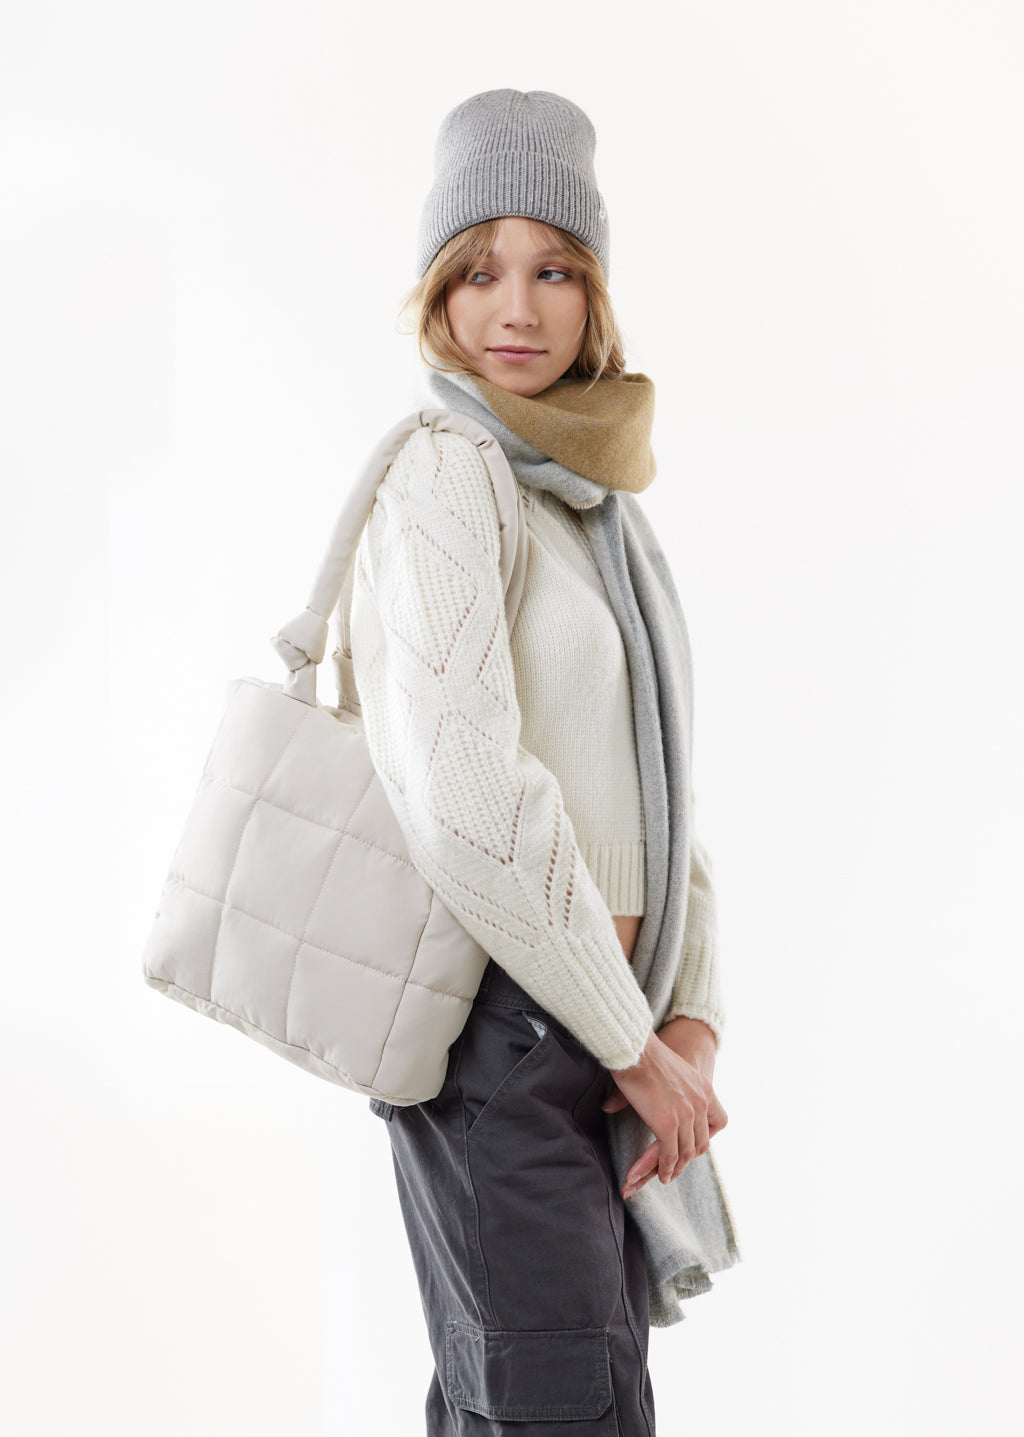 Square Quilted Handbag